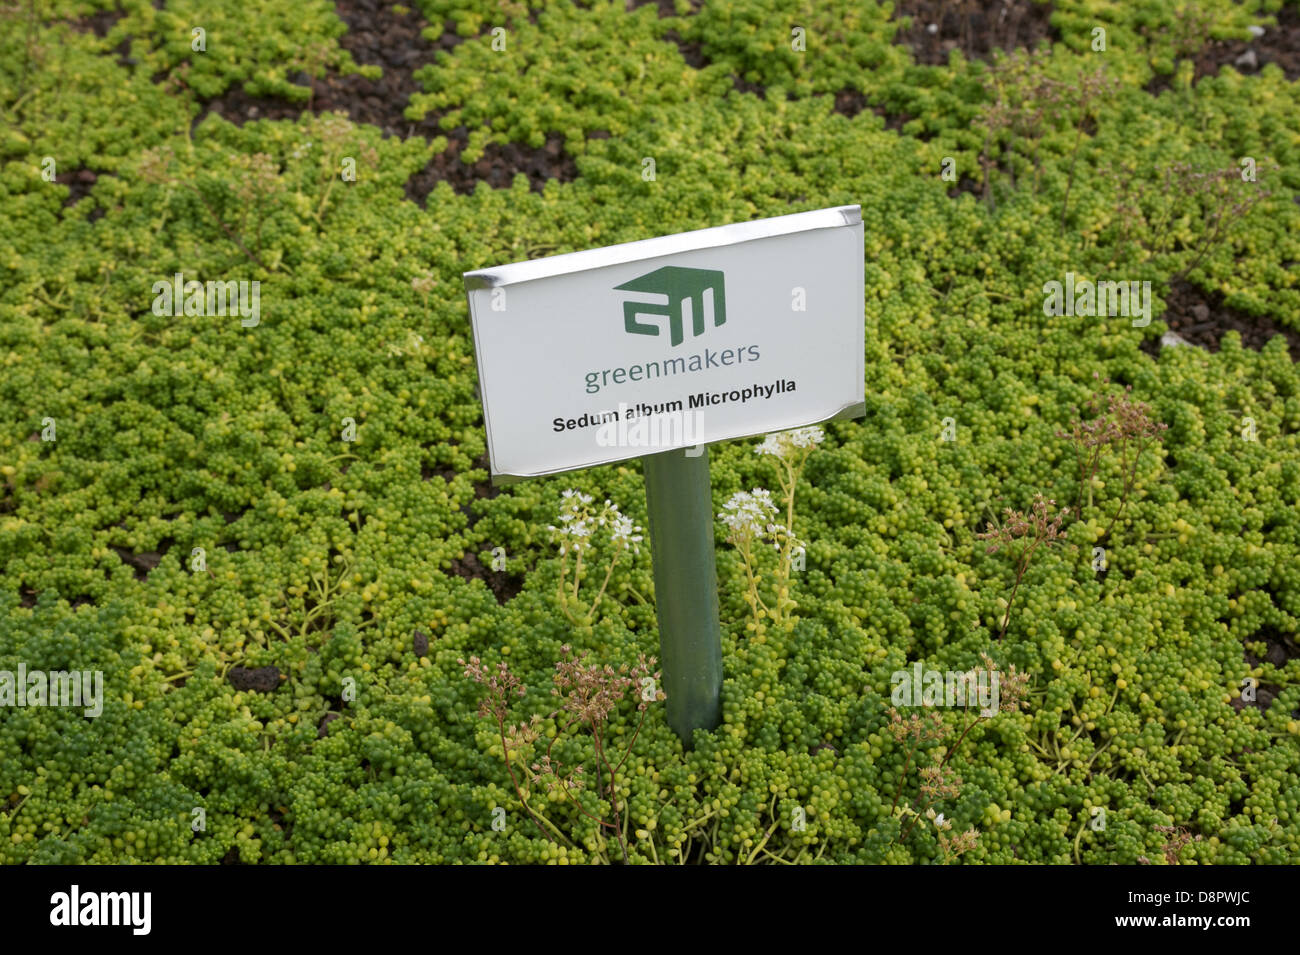 Greenmakers sedum album Microphylla used for green or living rooftops on buildings Stock Photo